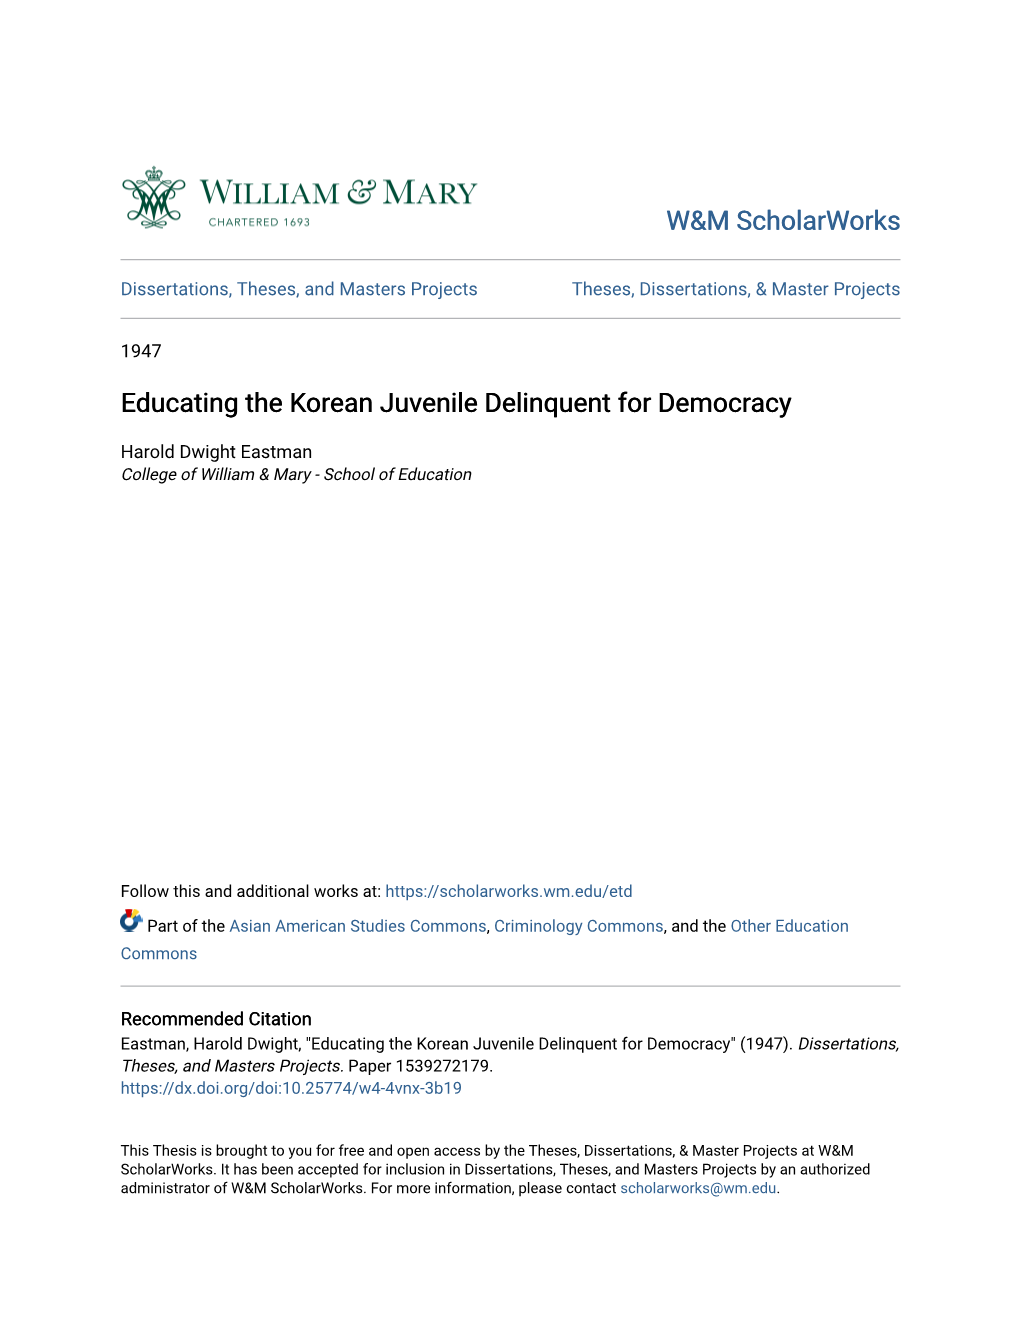 Educating the Korean Juvenile Delinquent for Democracy